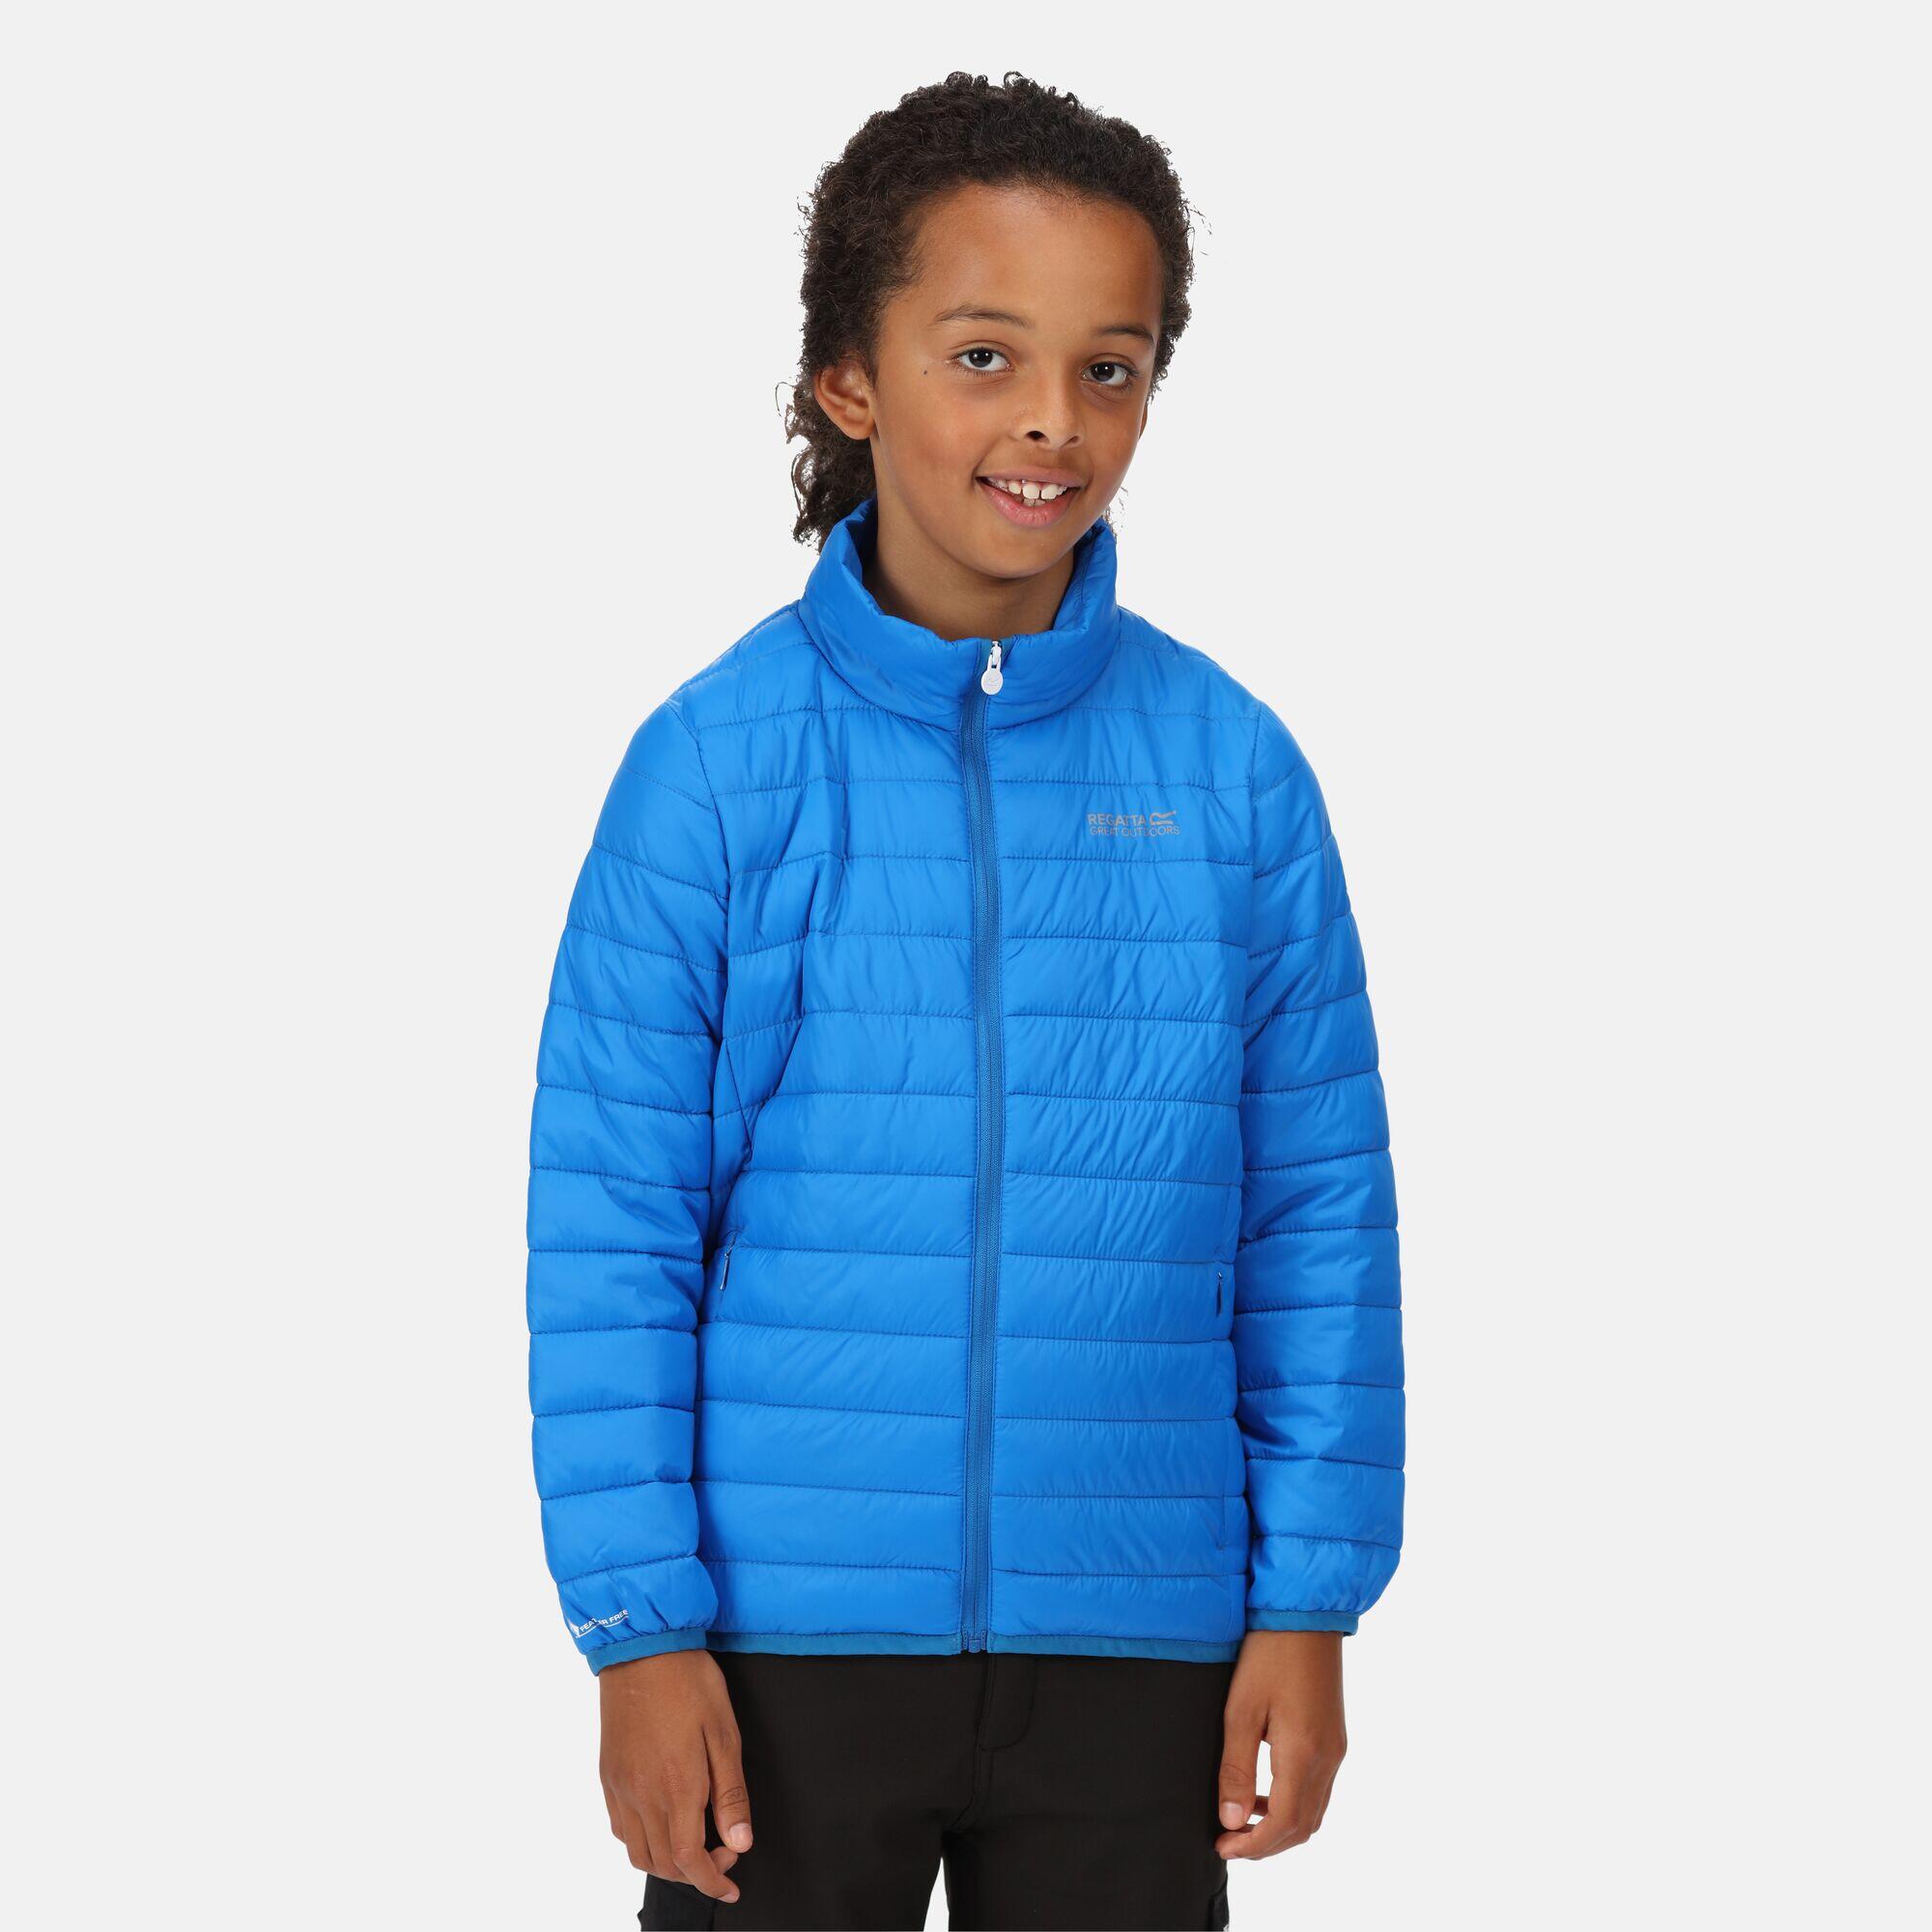 Hillpack Kids' Hiking Insulated Down Jacket - Bright Blue 1/5